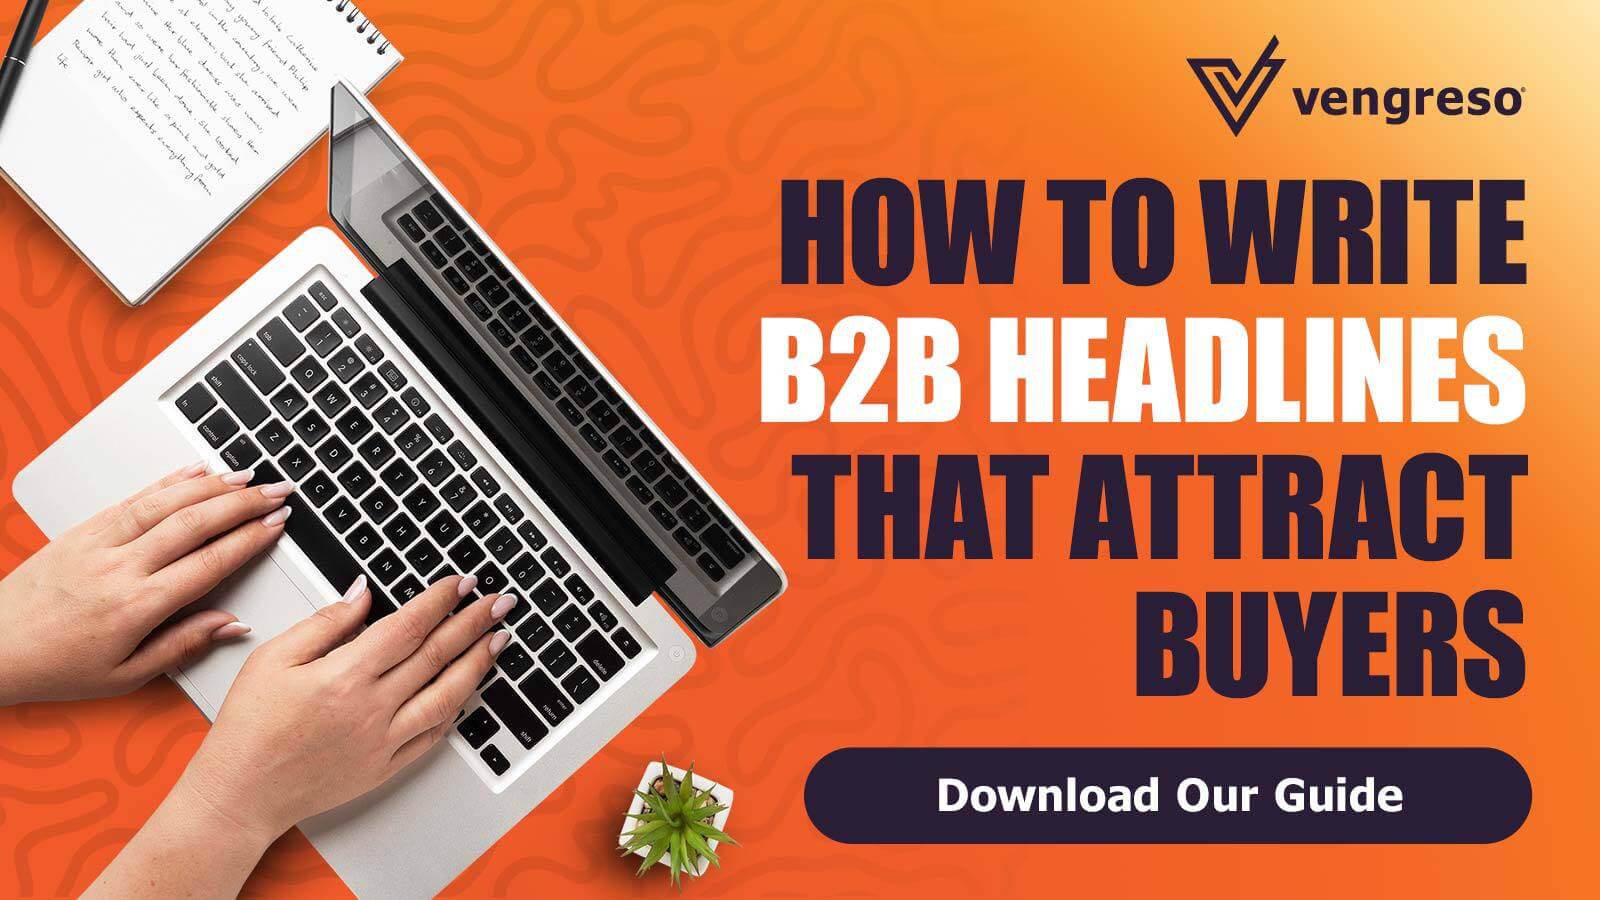 5 Steps for Writing B2B Headlines That Attract Buyers